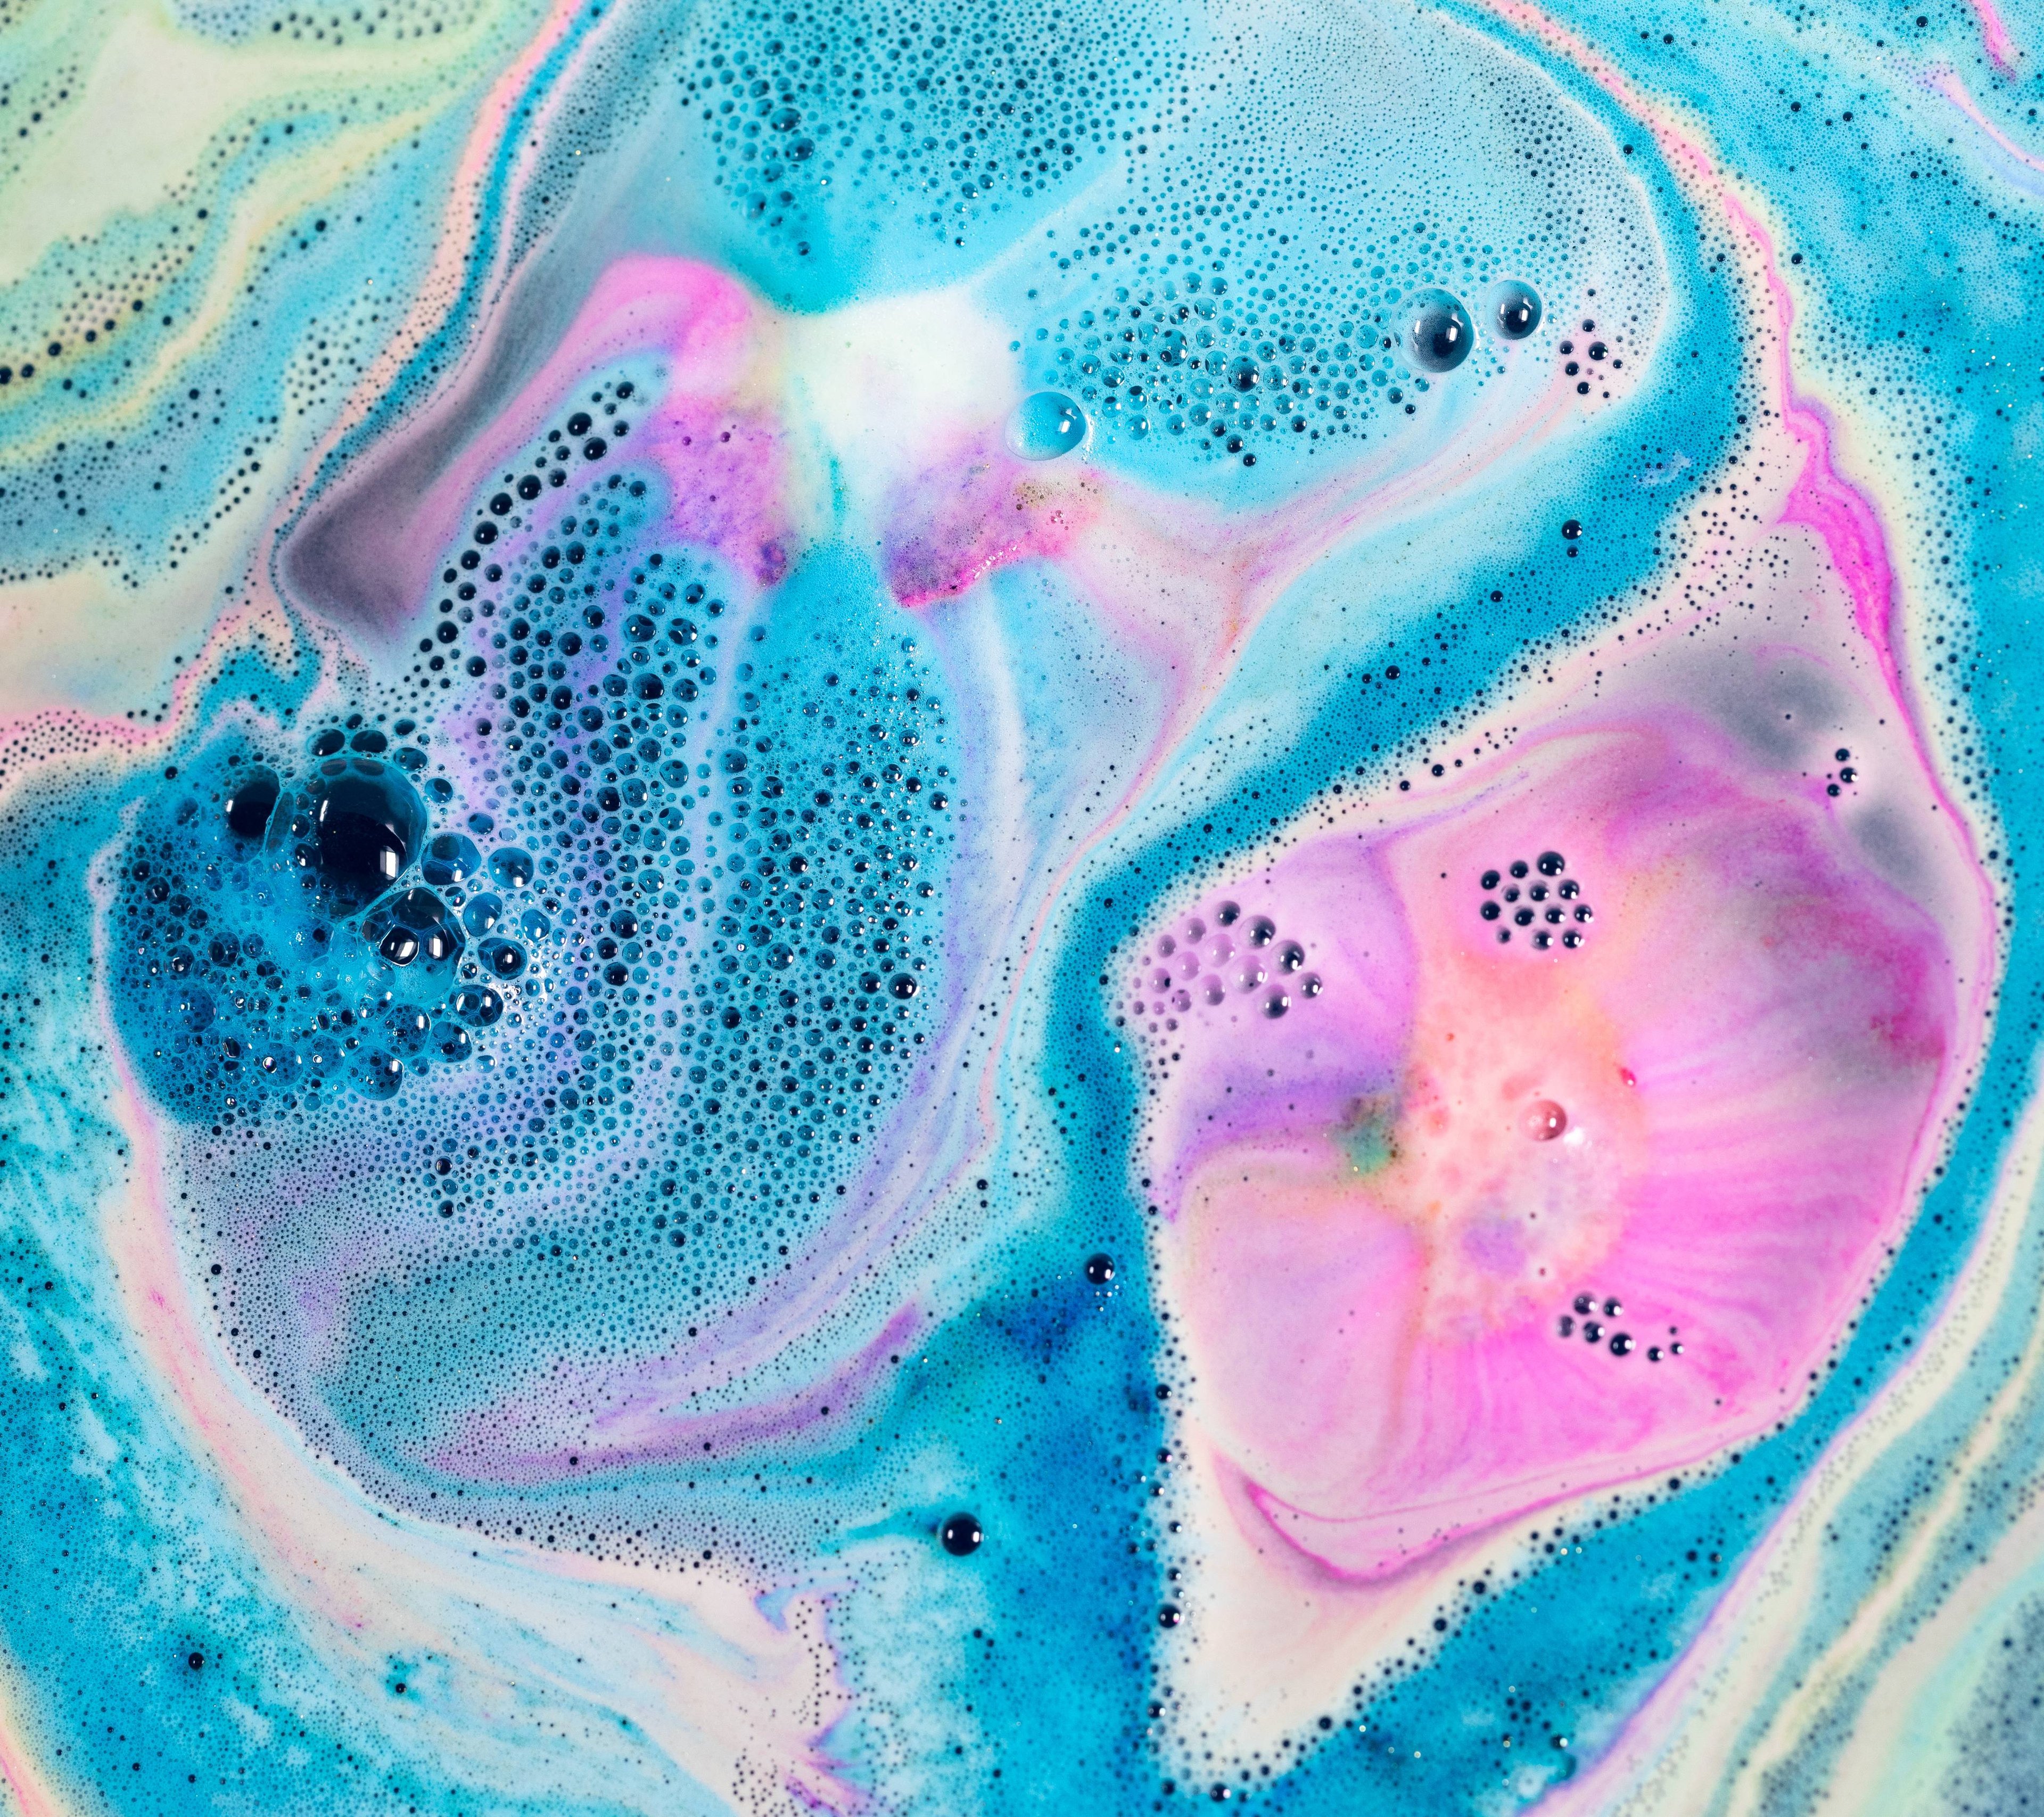 Bright blue, pink and white foam sit atop dark waters, creating a deep space effect. A myriad of bubbles complete this galaxy from the Intergalactic bath bomb.